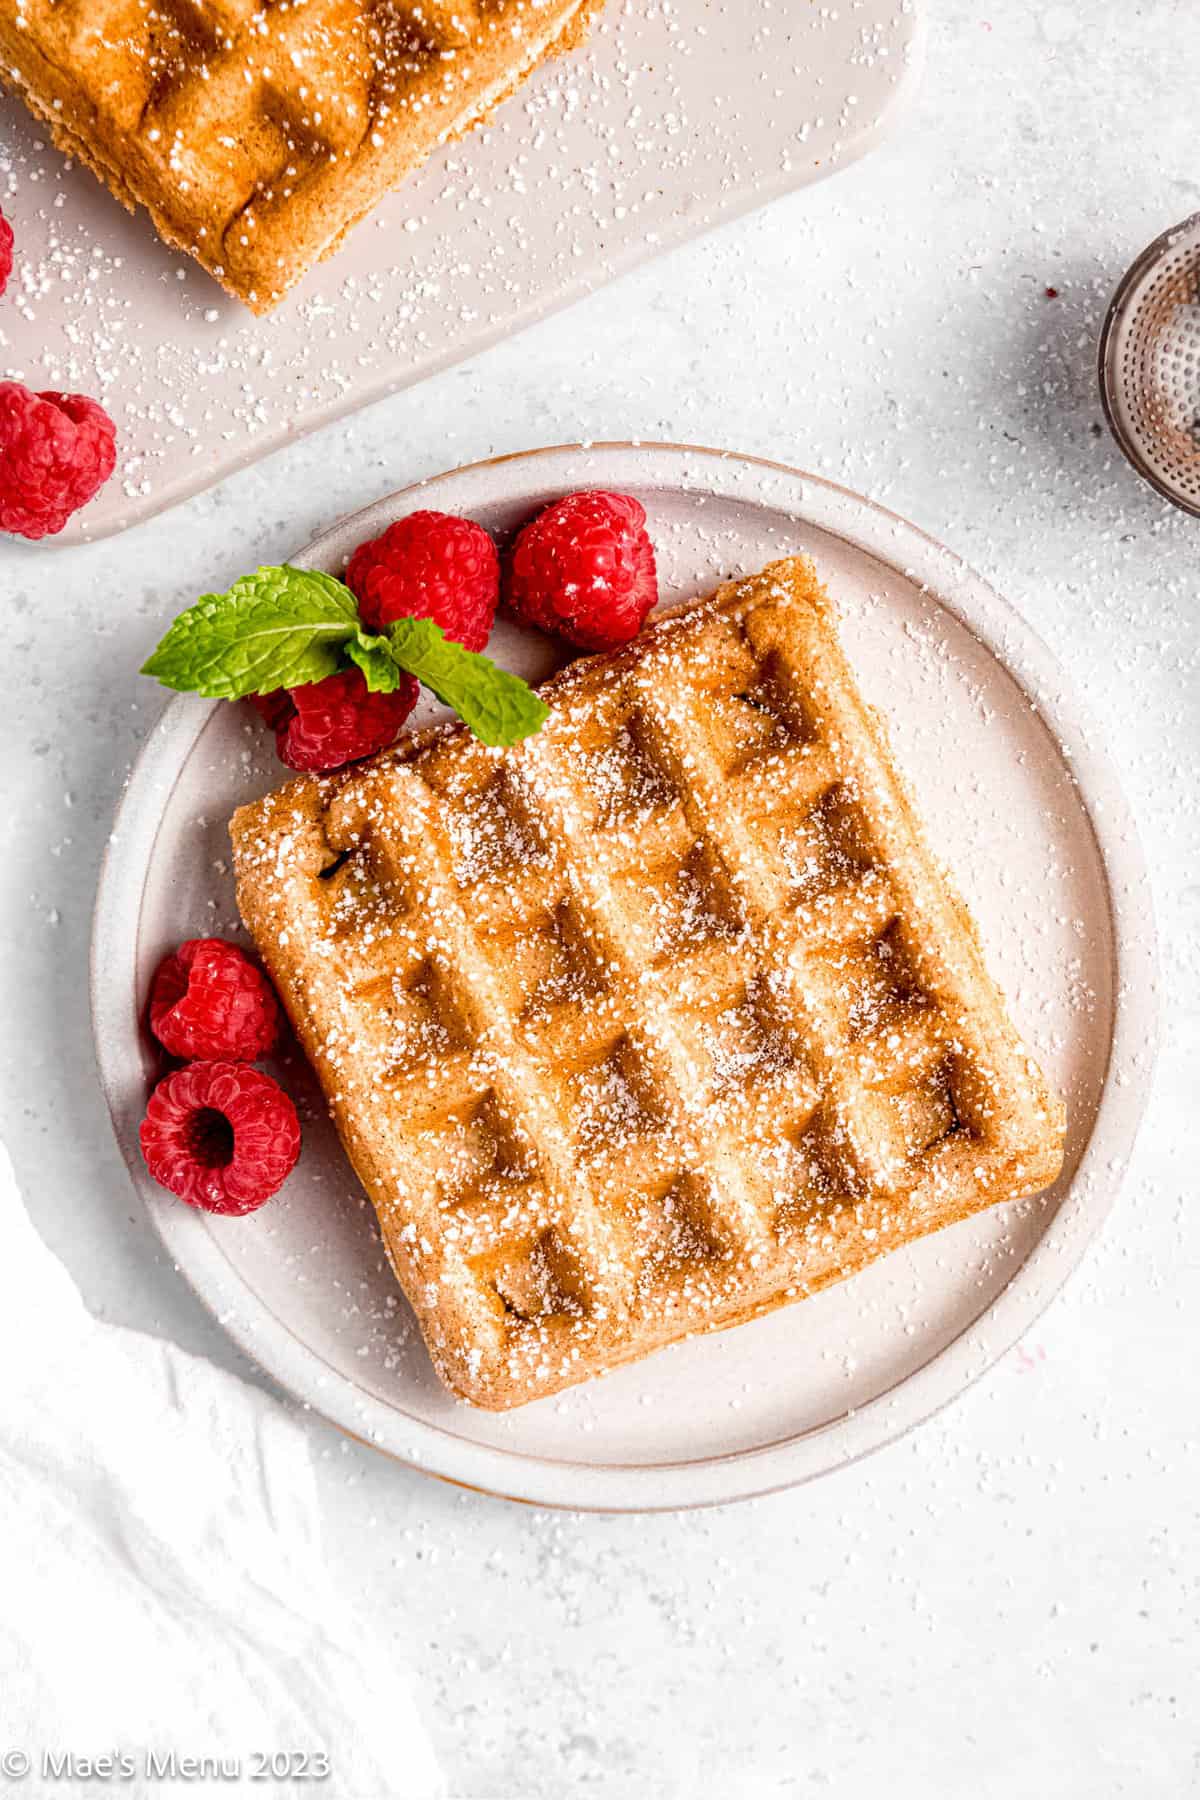 Overhead shot of a plate of a small dairy-free waffle.